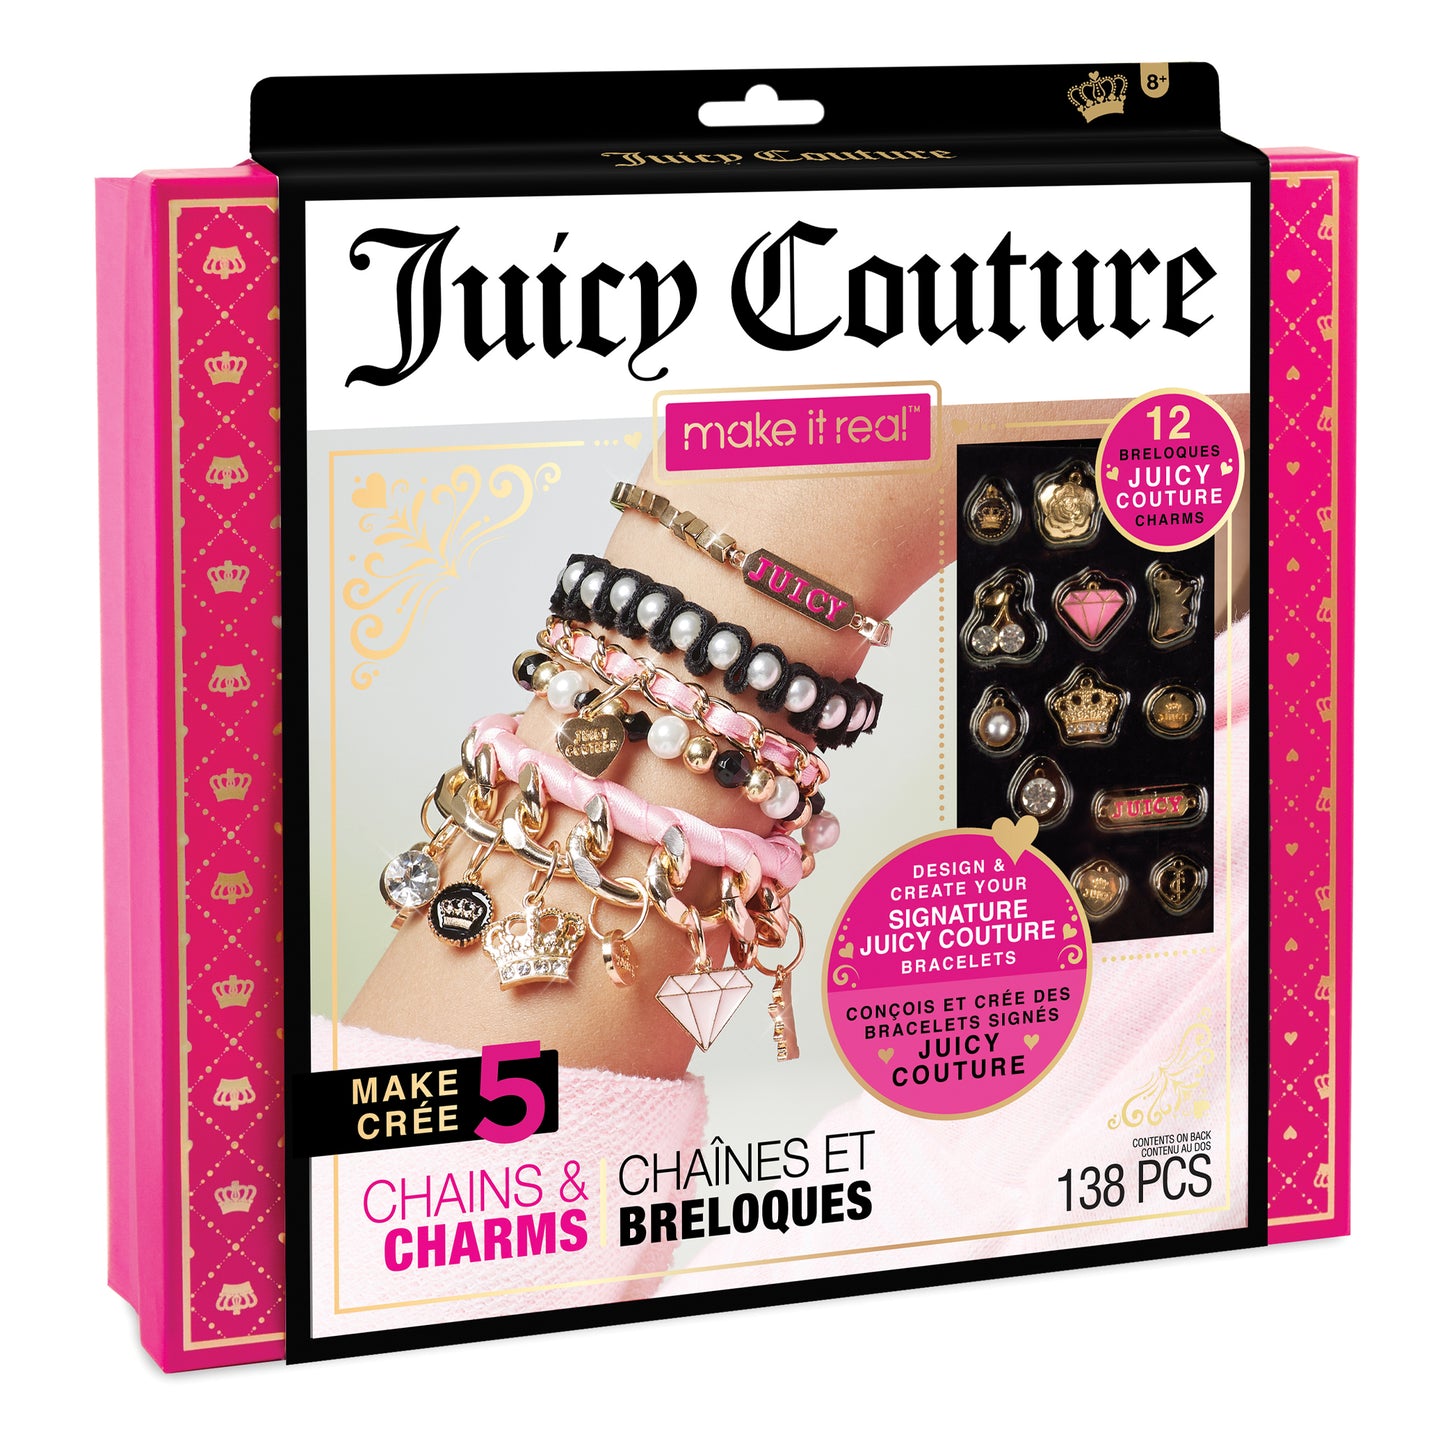 Juicy Couture™ Chains & Charms